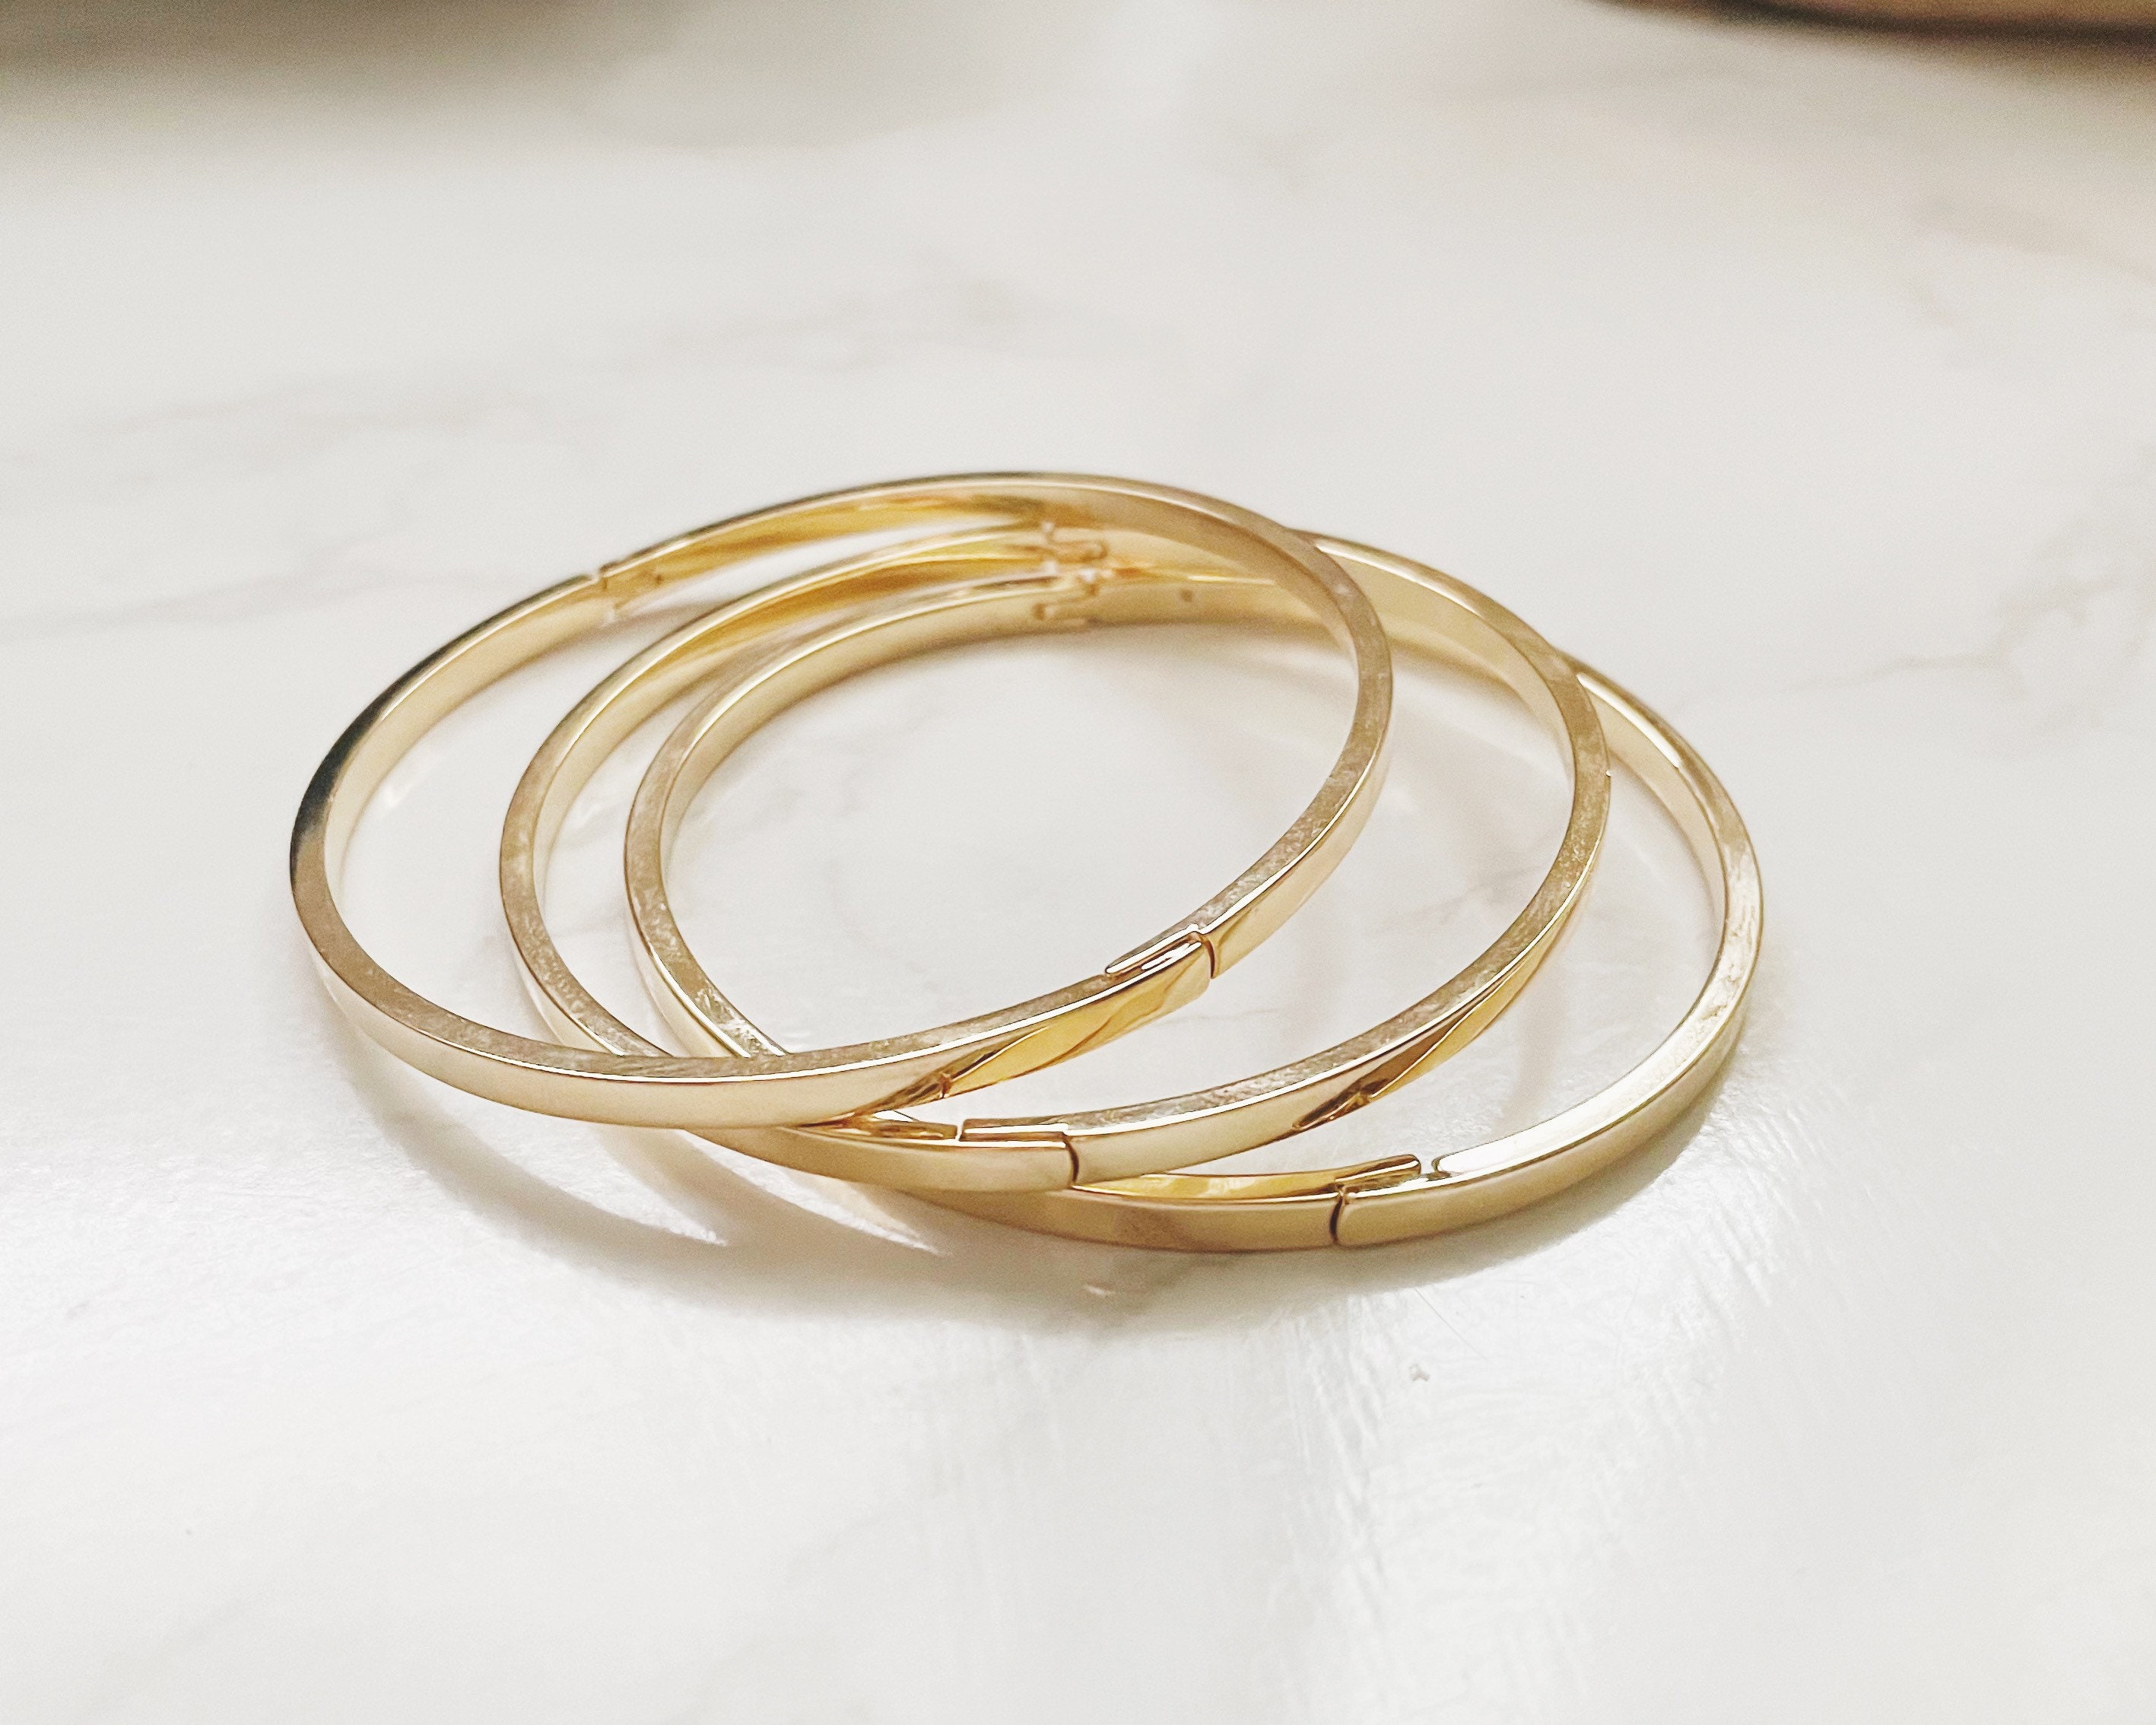 9k Yellow Gold Single Hook Bangle 18x7.5 mm wide - 8 inches - TOP JEWELLERY